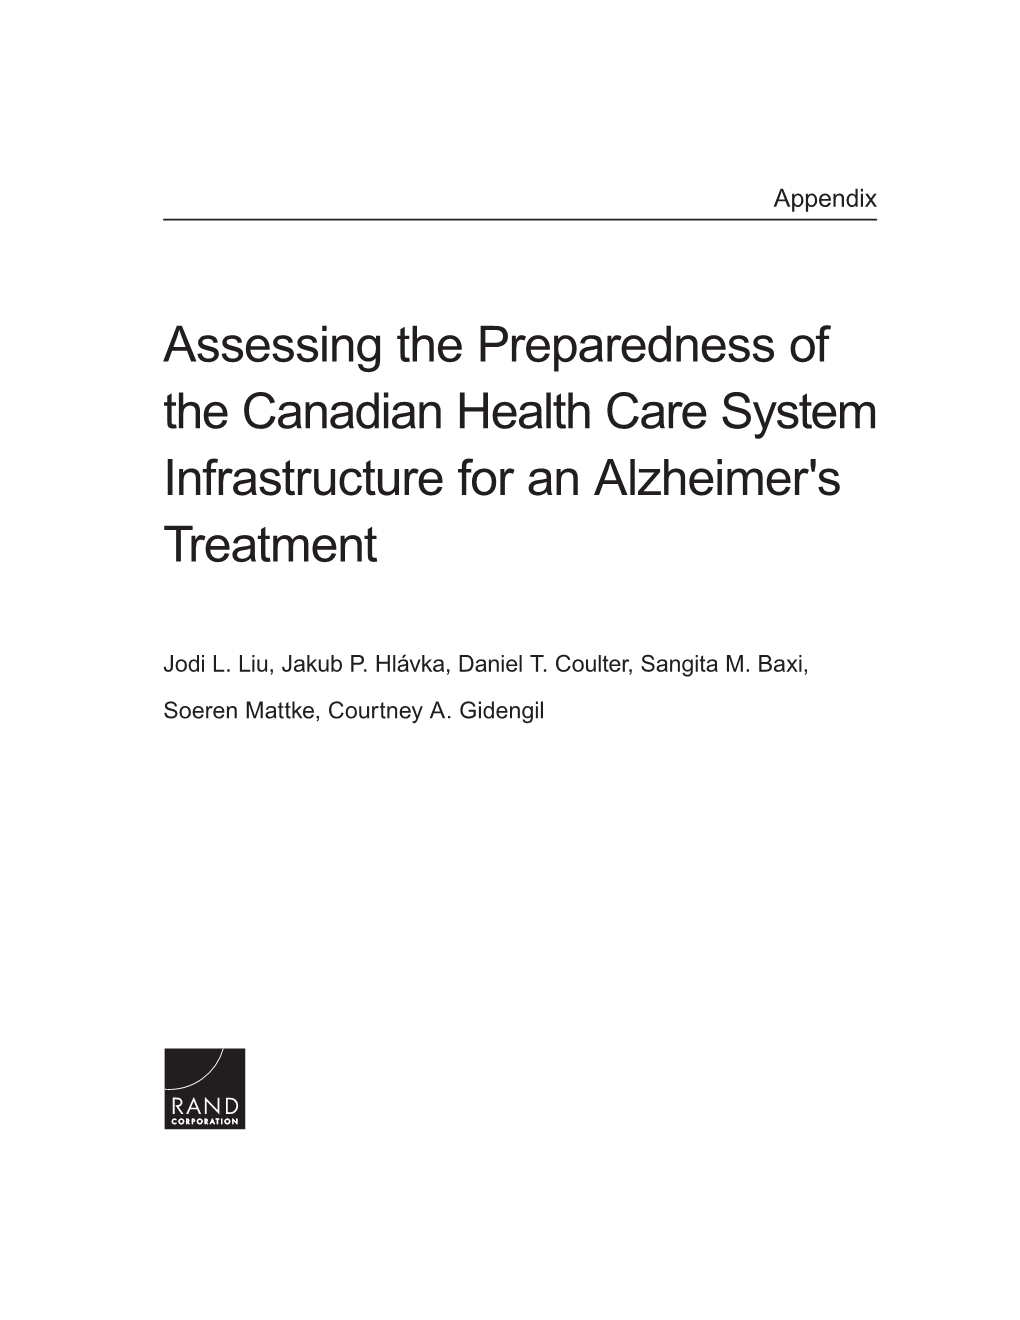 Assessing the Preparedness of the Canadian Health Care System Infrastructure for an Alzheimer's Treatment